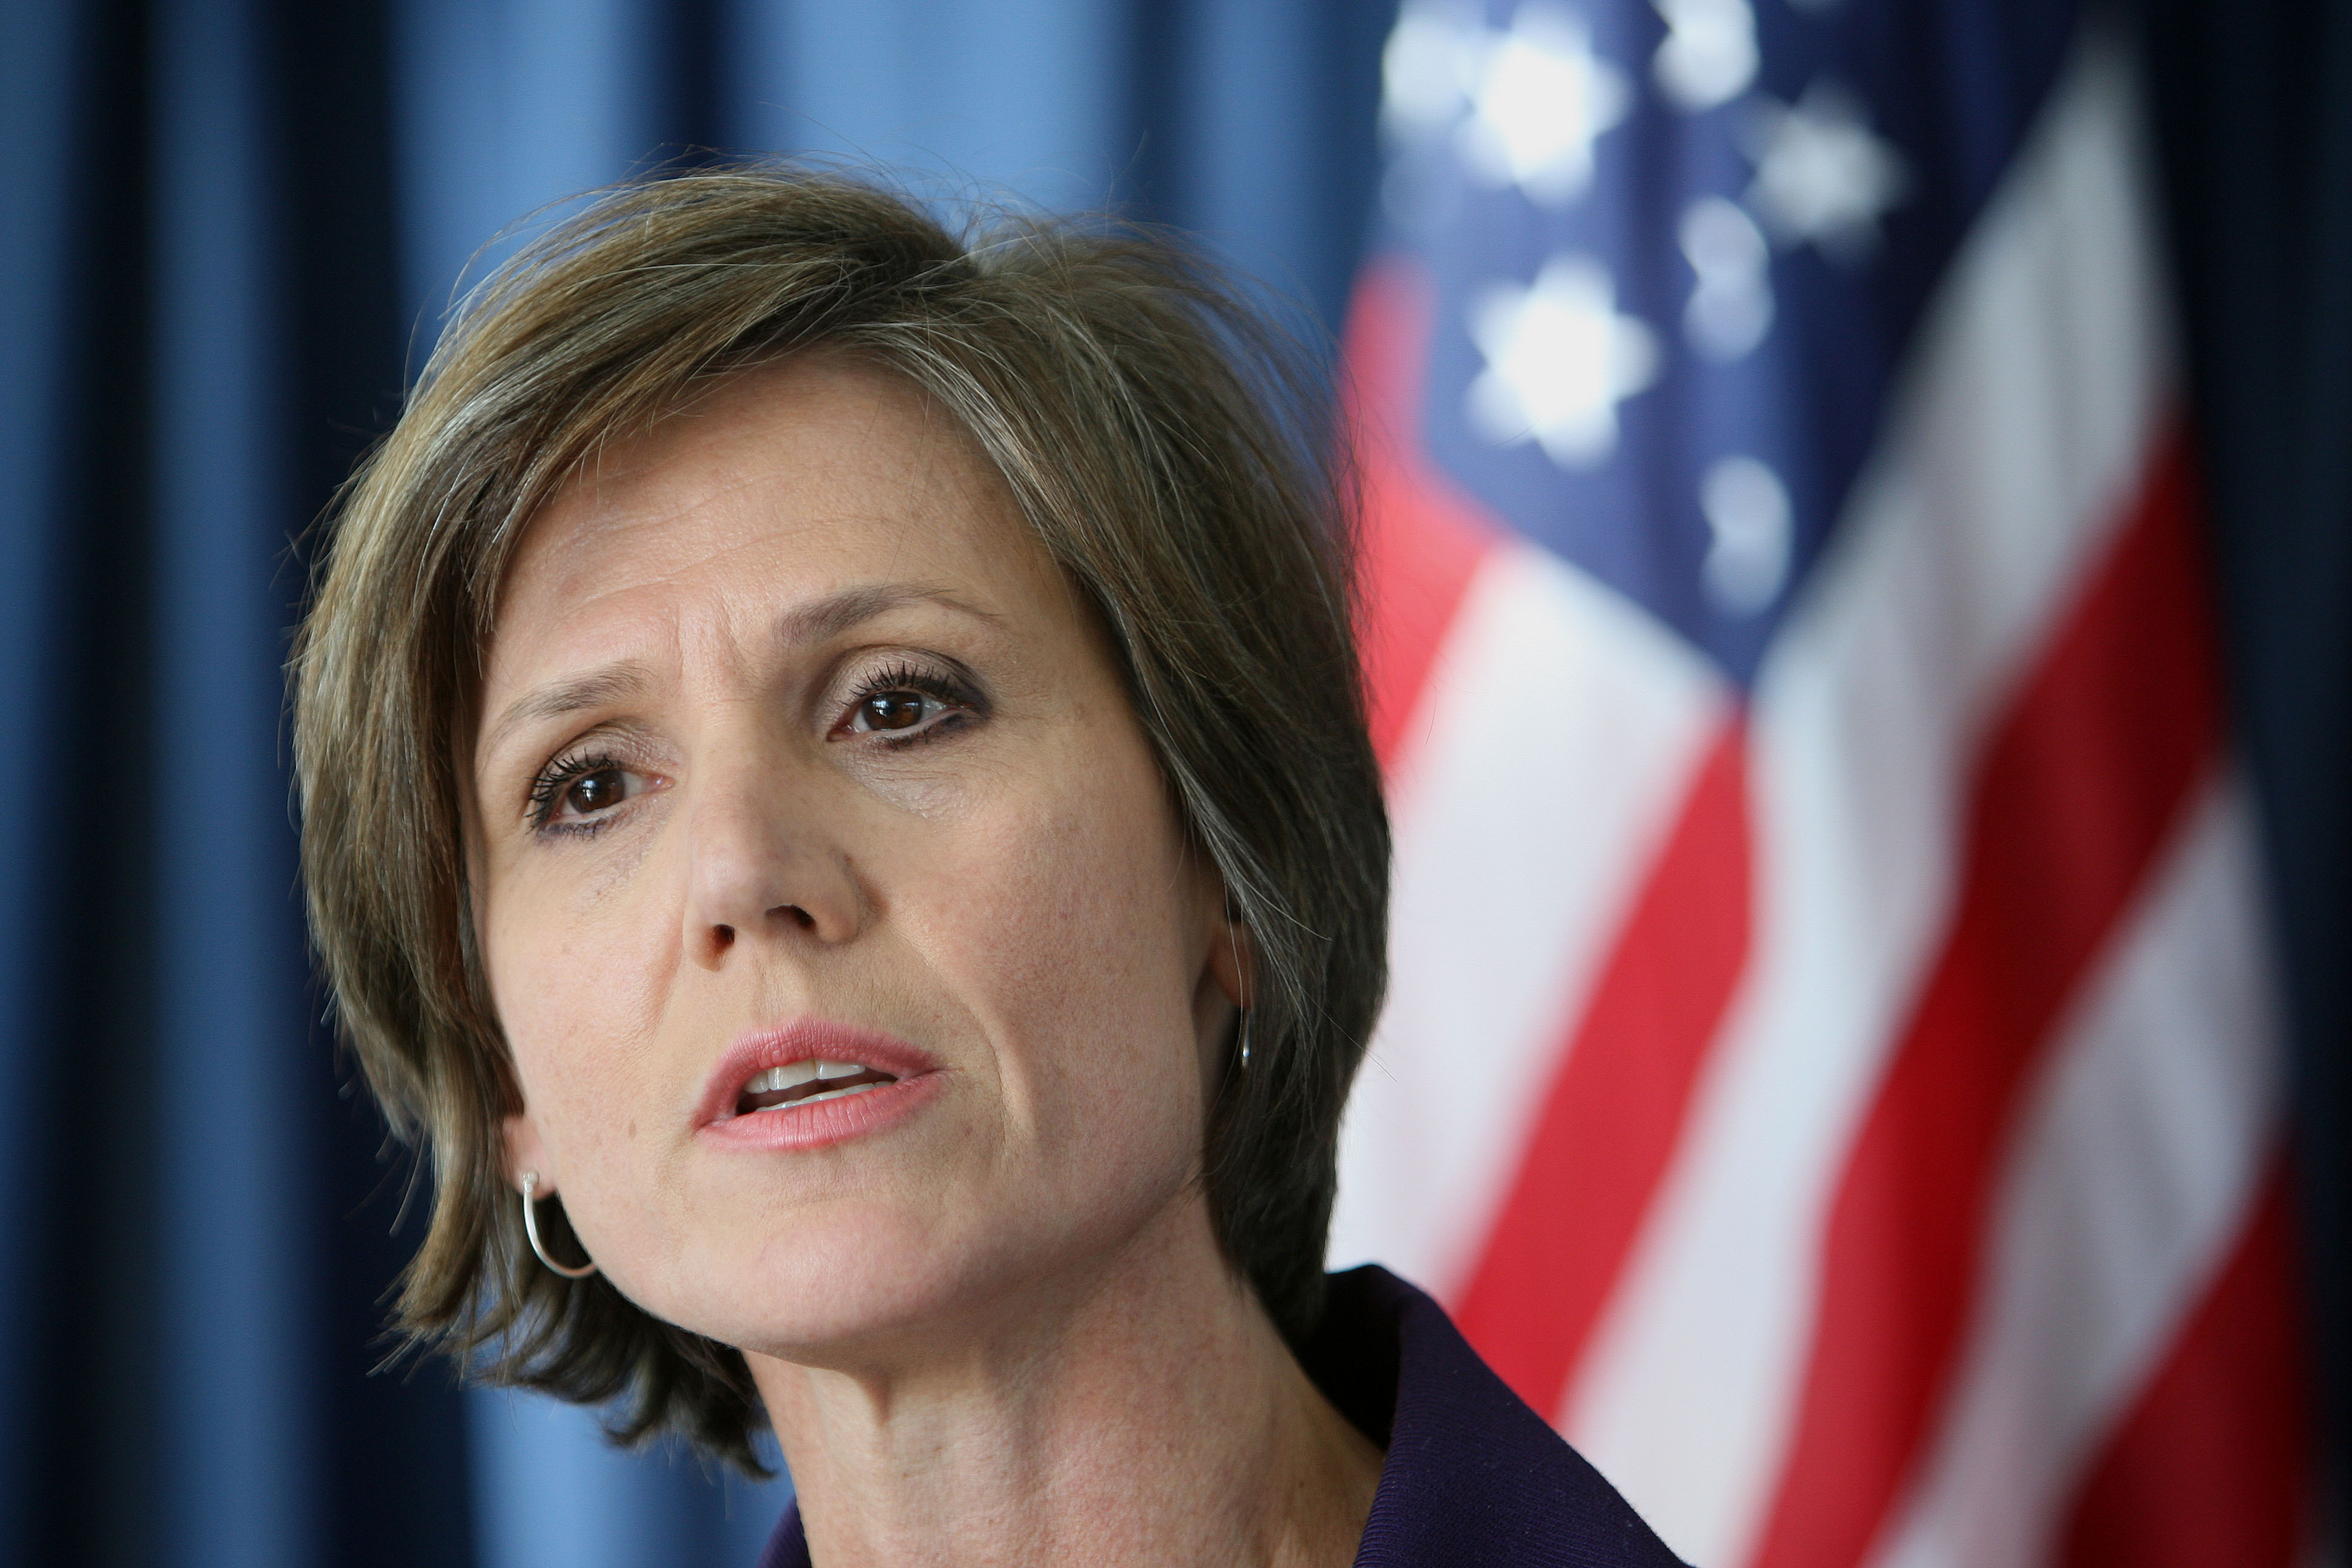 Sally Yates gives detailed account of events that led to her firing